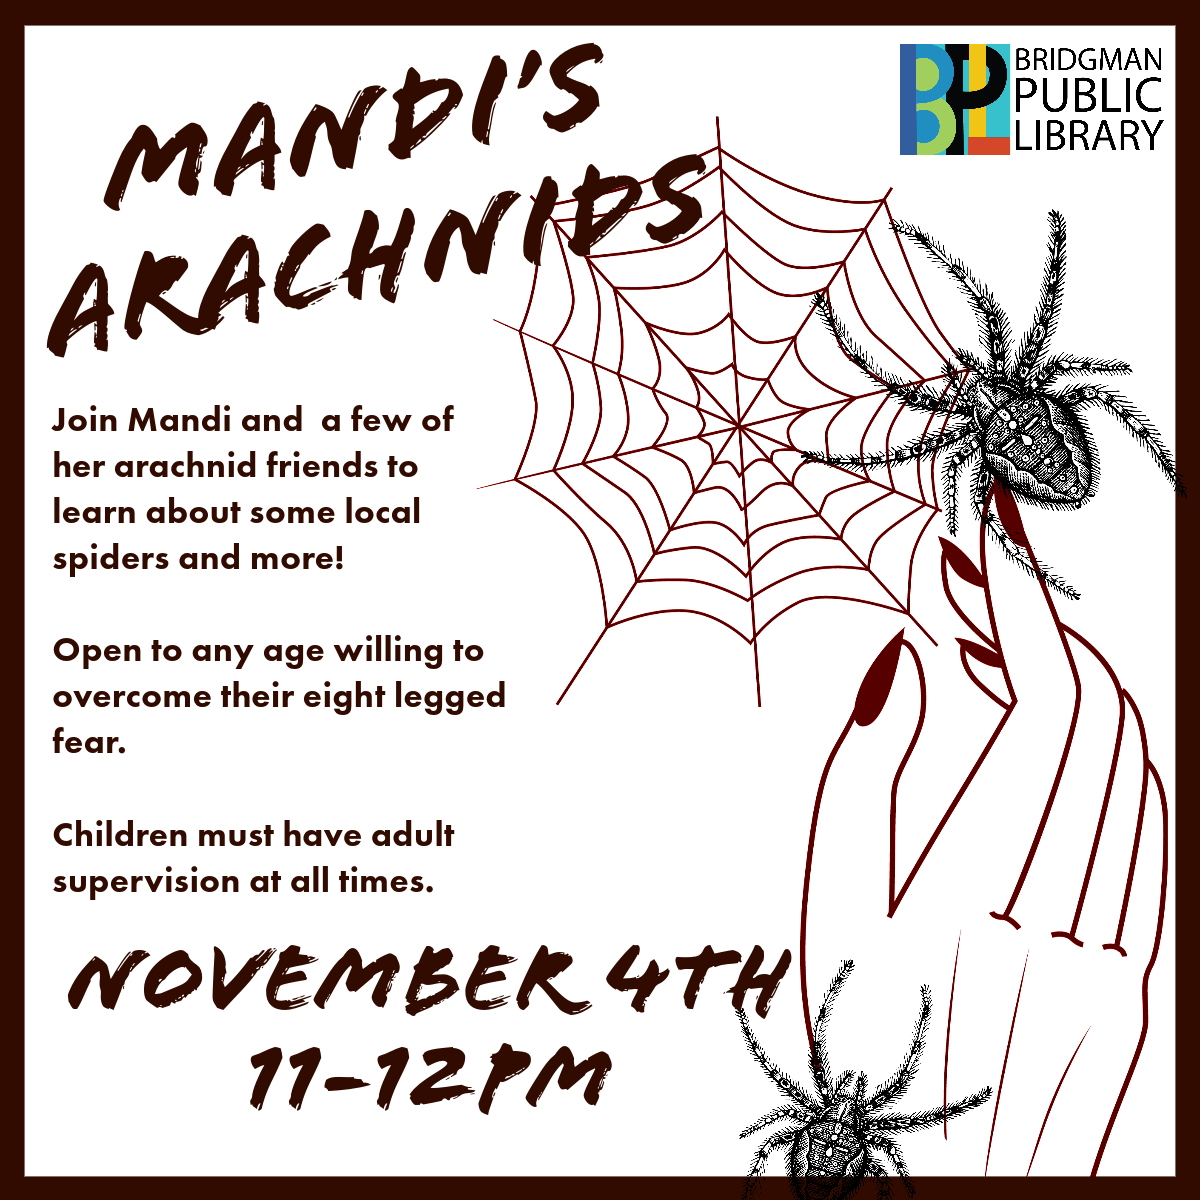 Learn to overcome your fear of spiders at this all ages program.